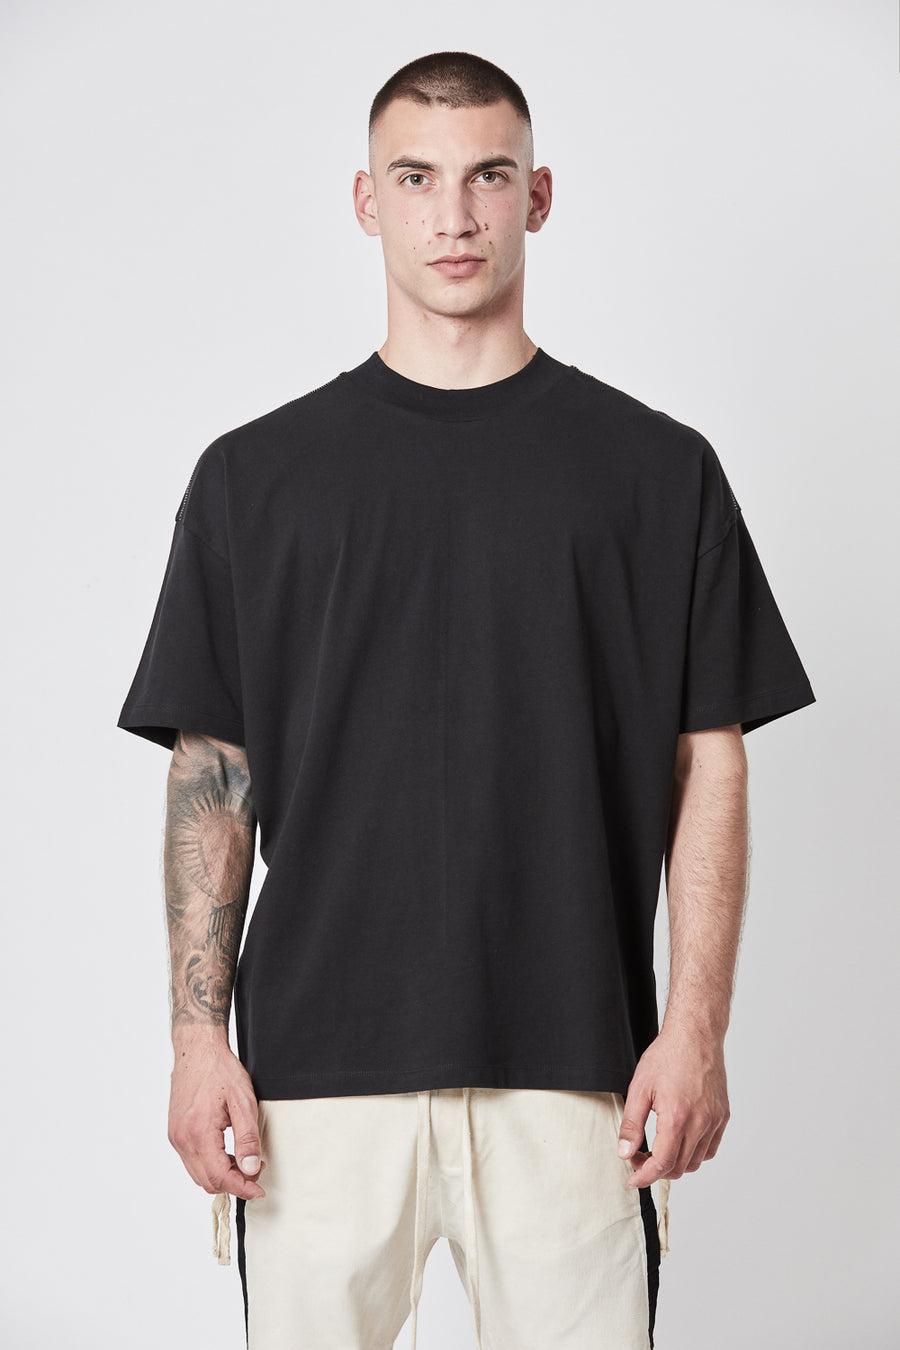 Buy the Thom Krom M TS 717 T-Shirt in Black at Intro. Spend £50 for free UK delivery. Official stockists. We ship worldwide.